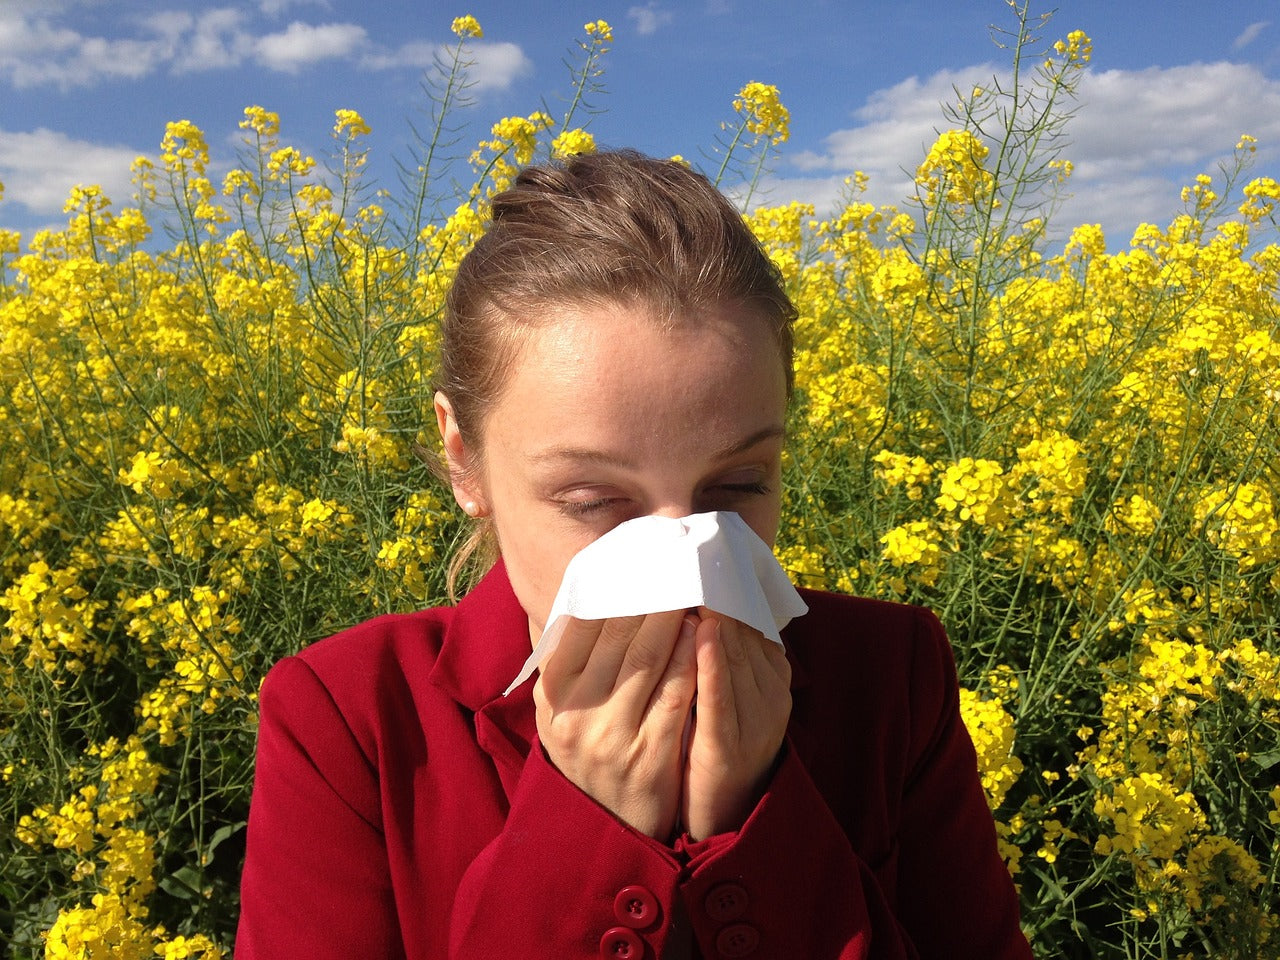 How To Stop Allergies - Naturally